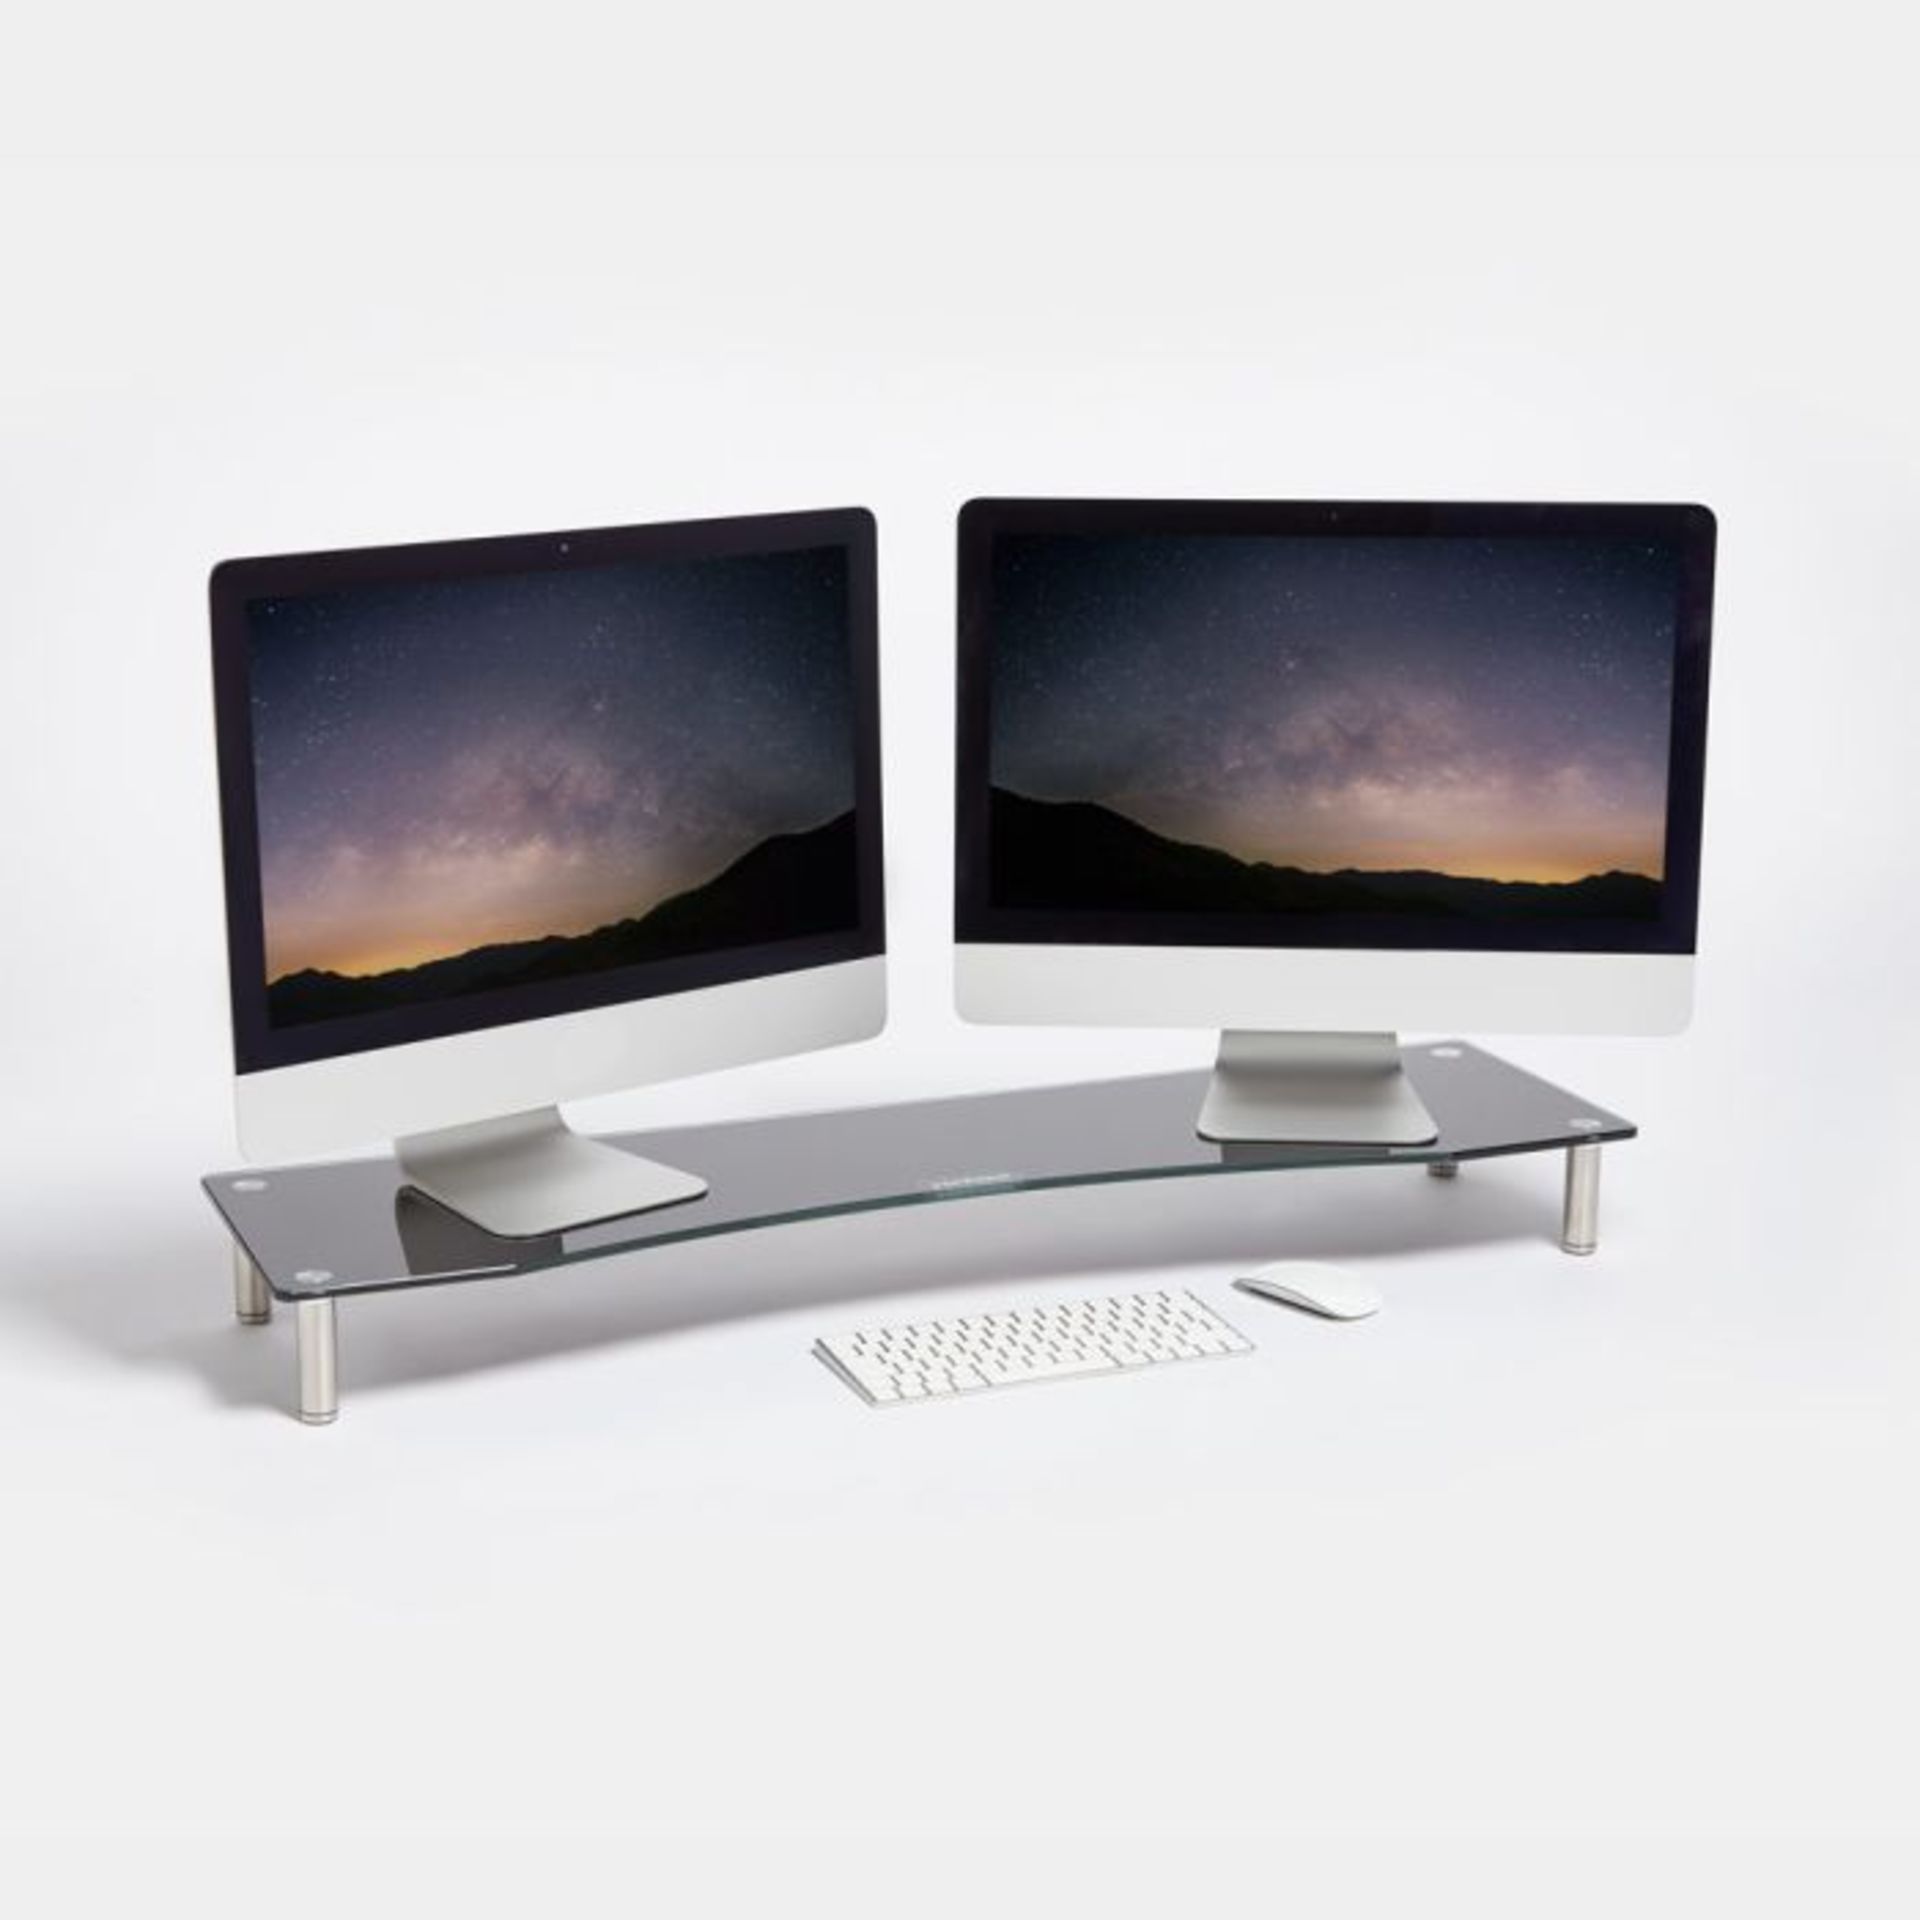 XL Black Glass Monitor Stand. - ER33. Helping improve your posture and give you more desk space,